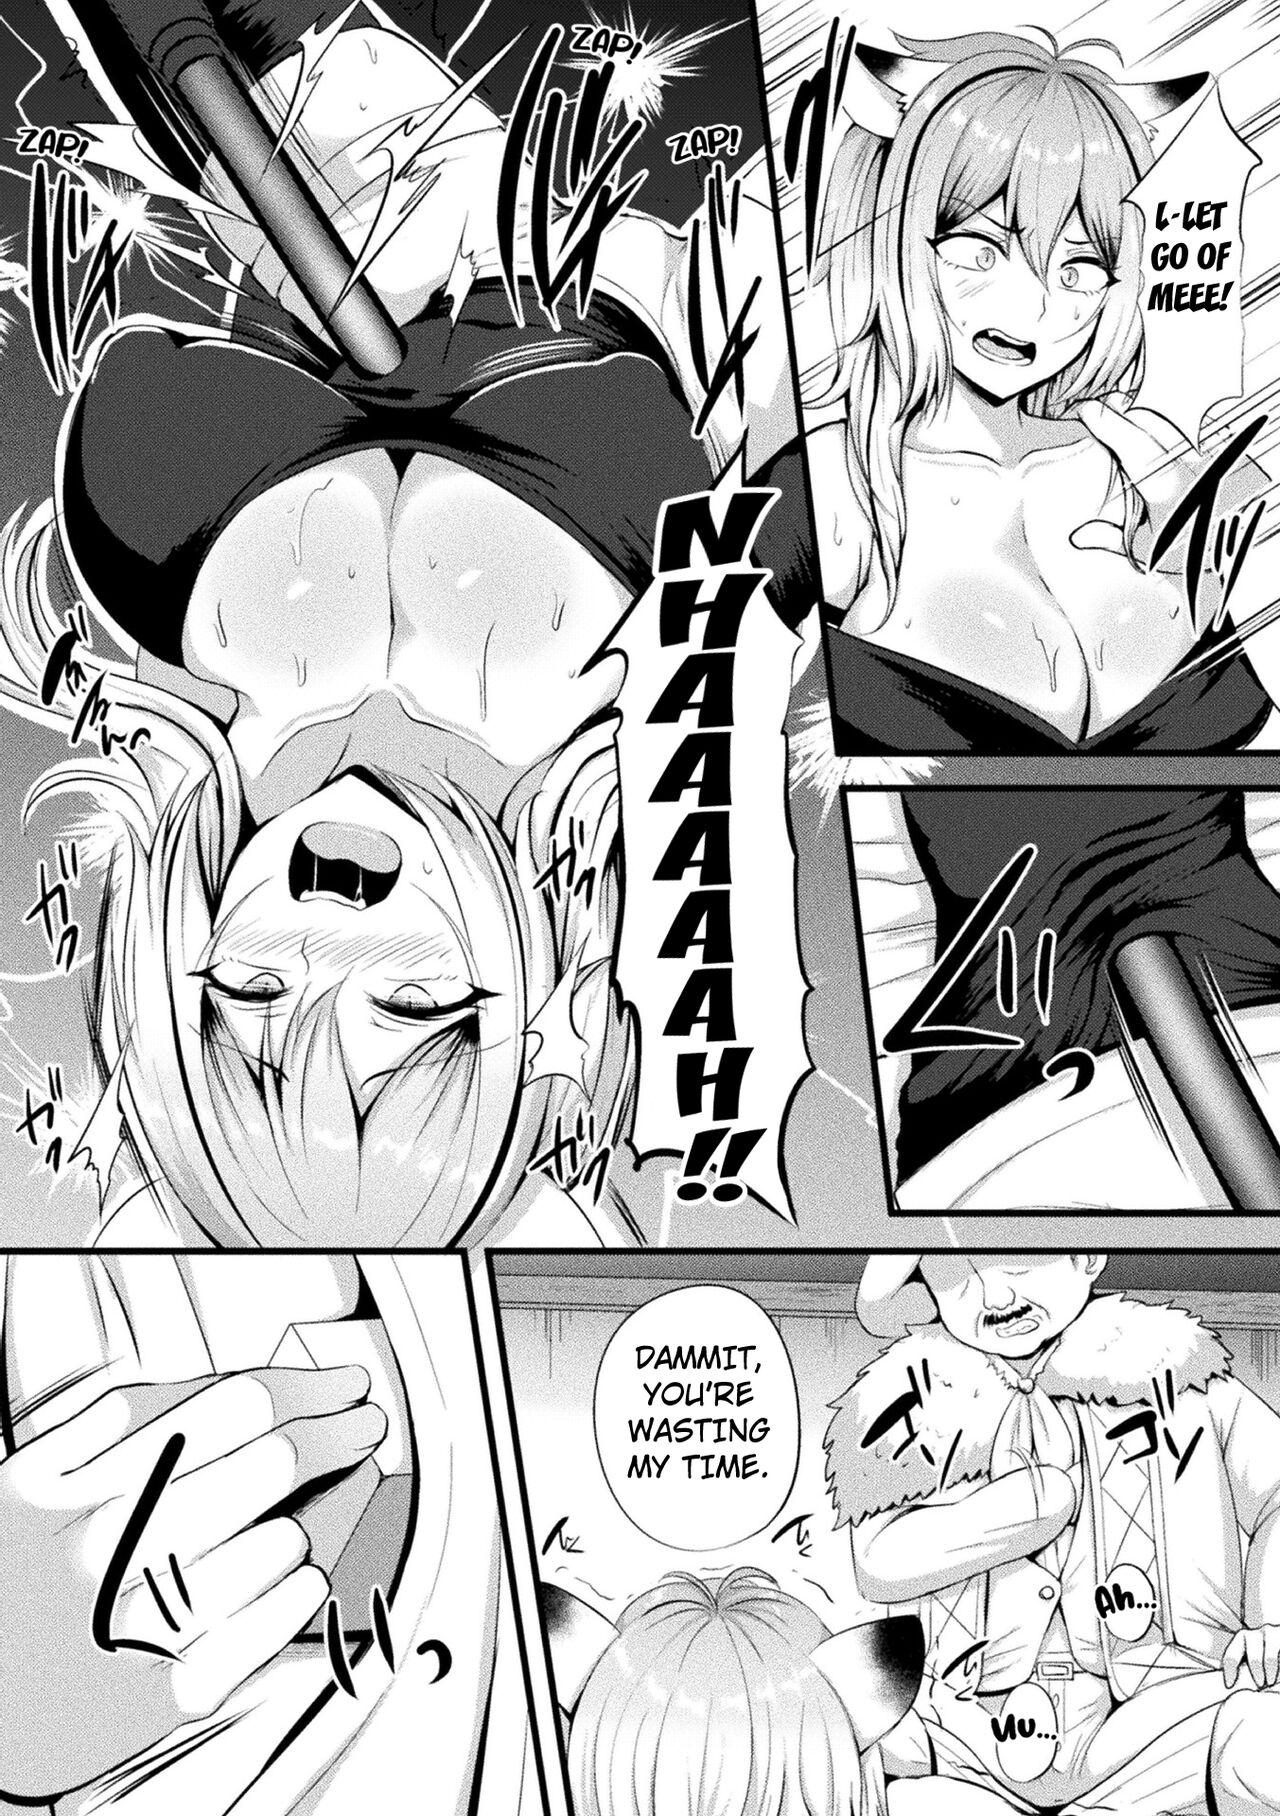 Camgirl The Captived Beast Girl. Forced Climax by a Slime. Wank - Page 7